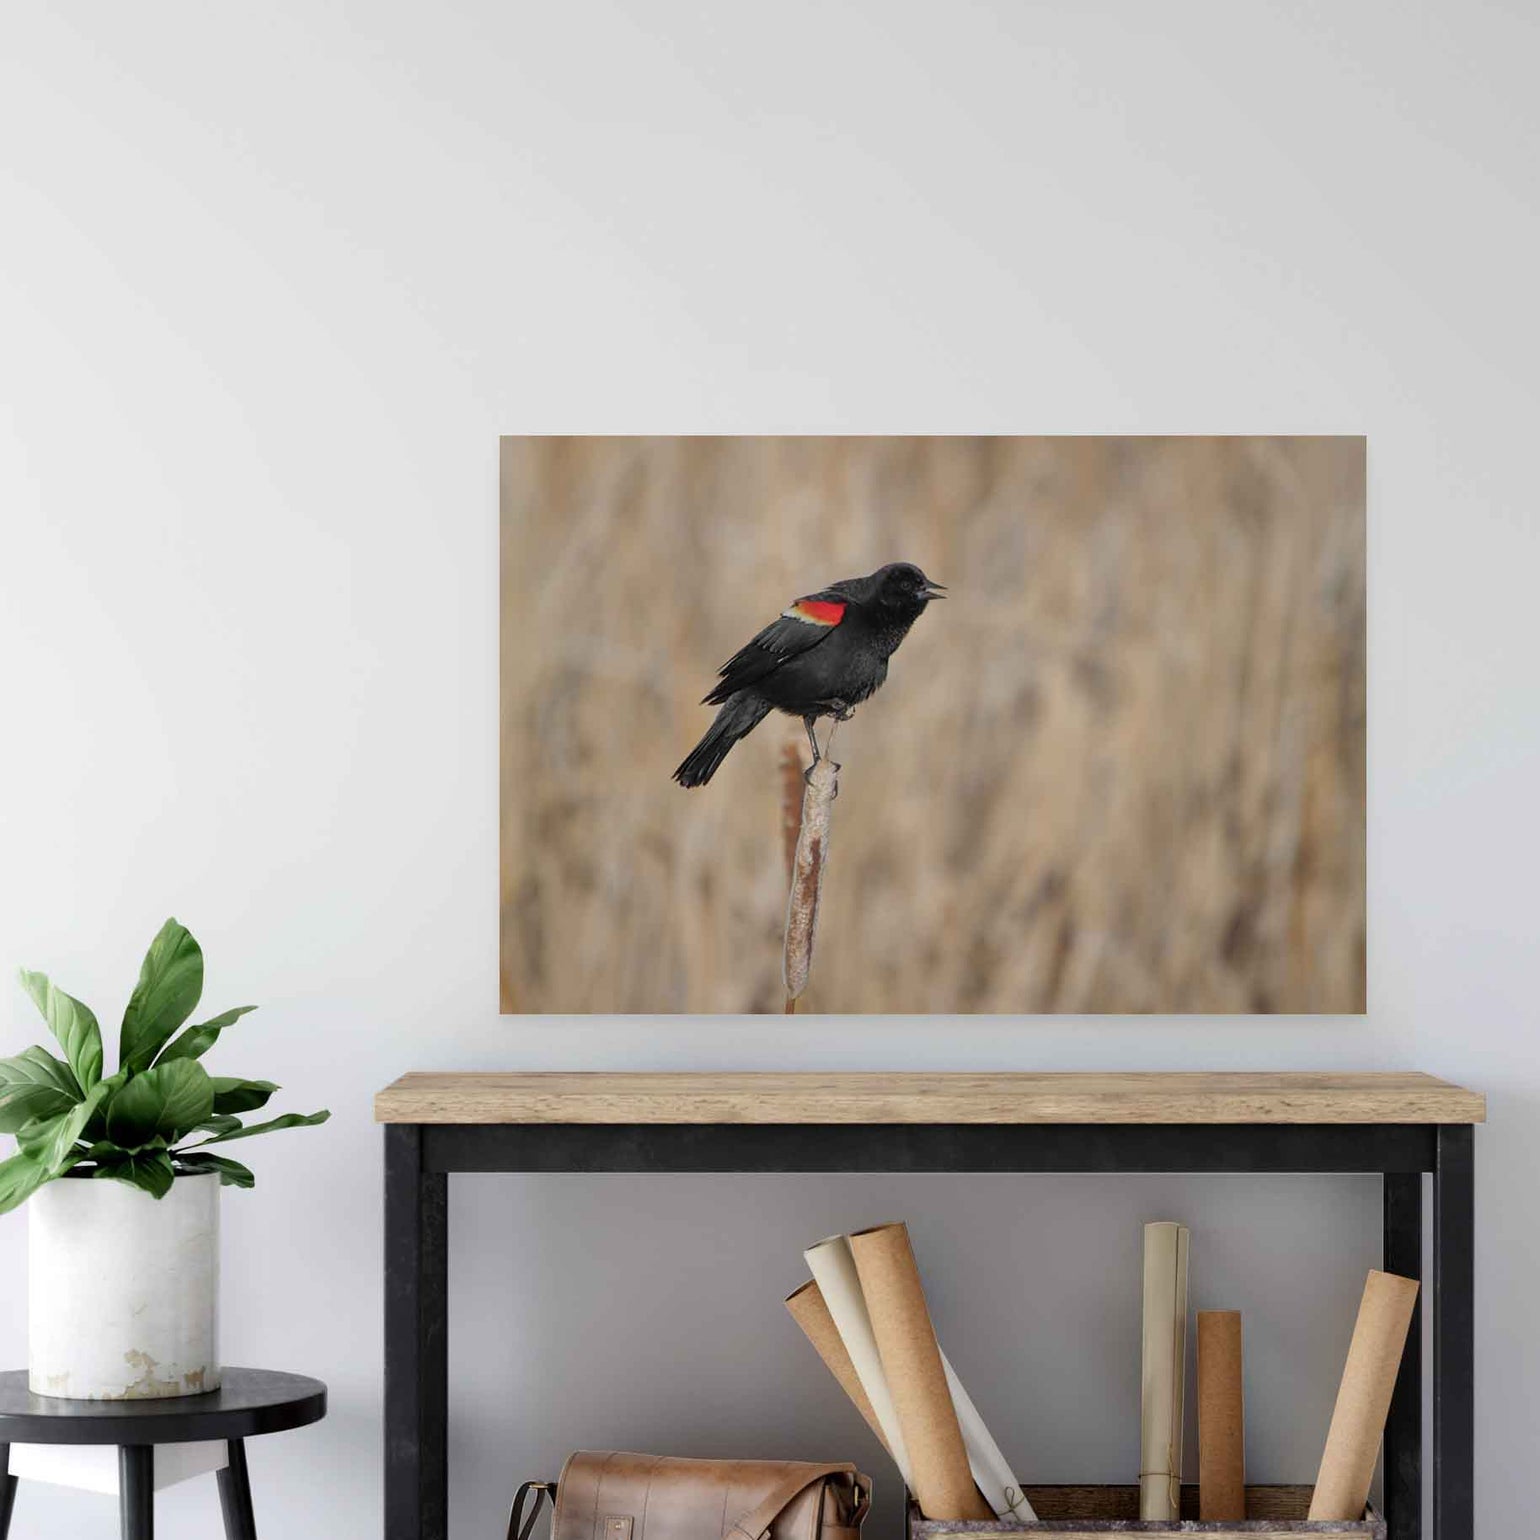 36 inch Red Winged Blackbird Decal Installed Above Console Table